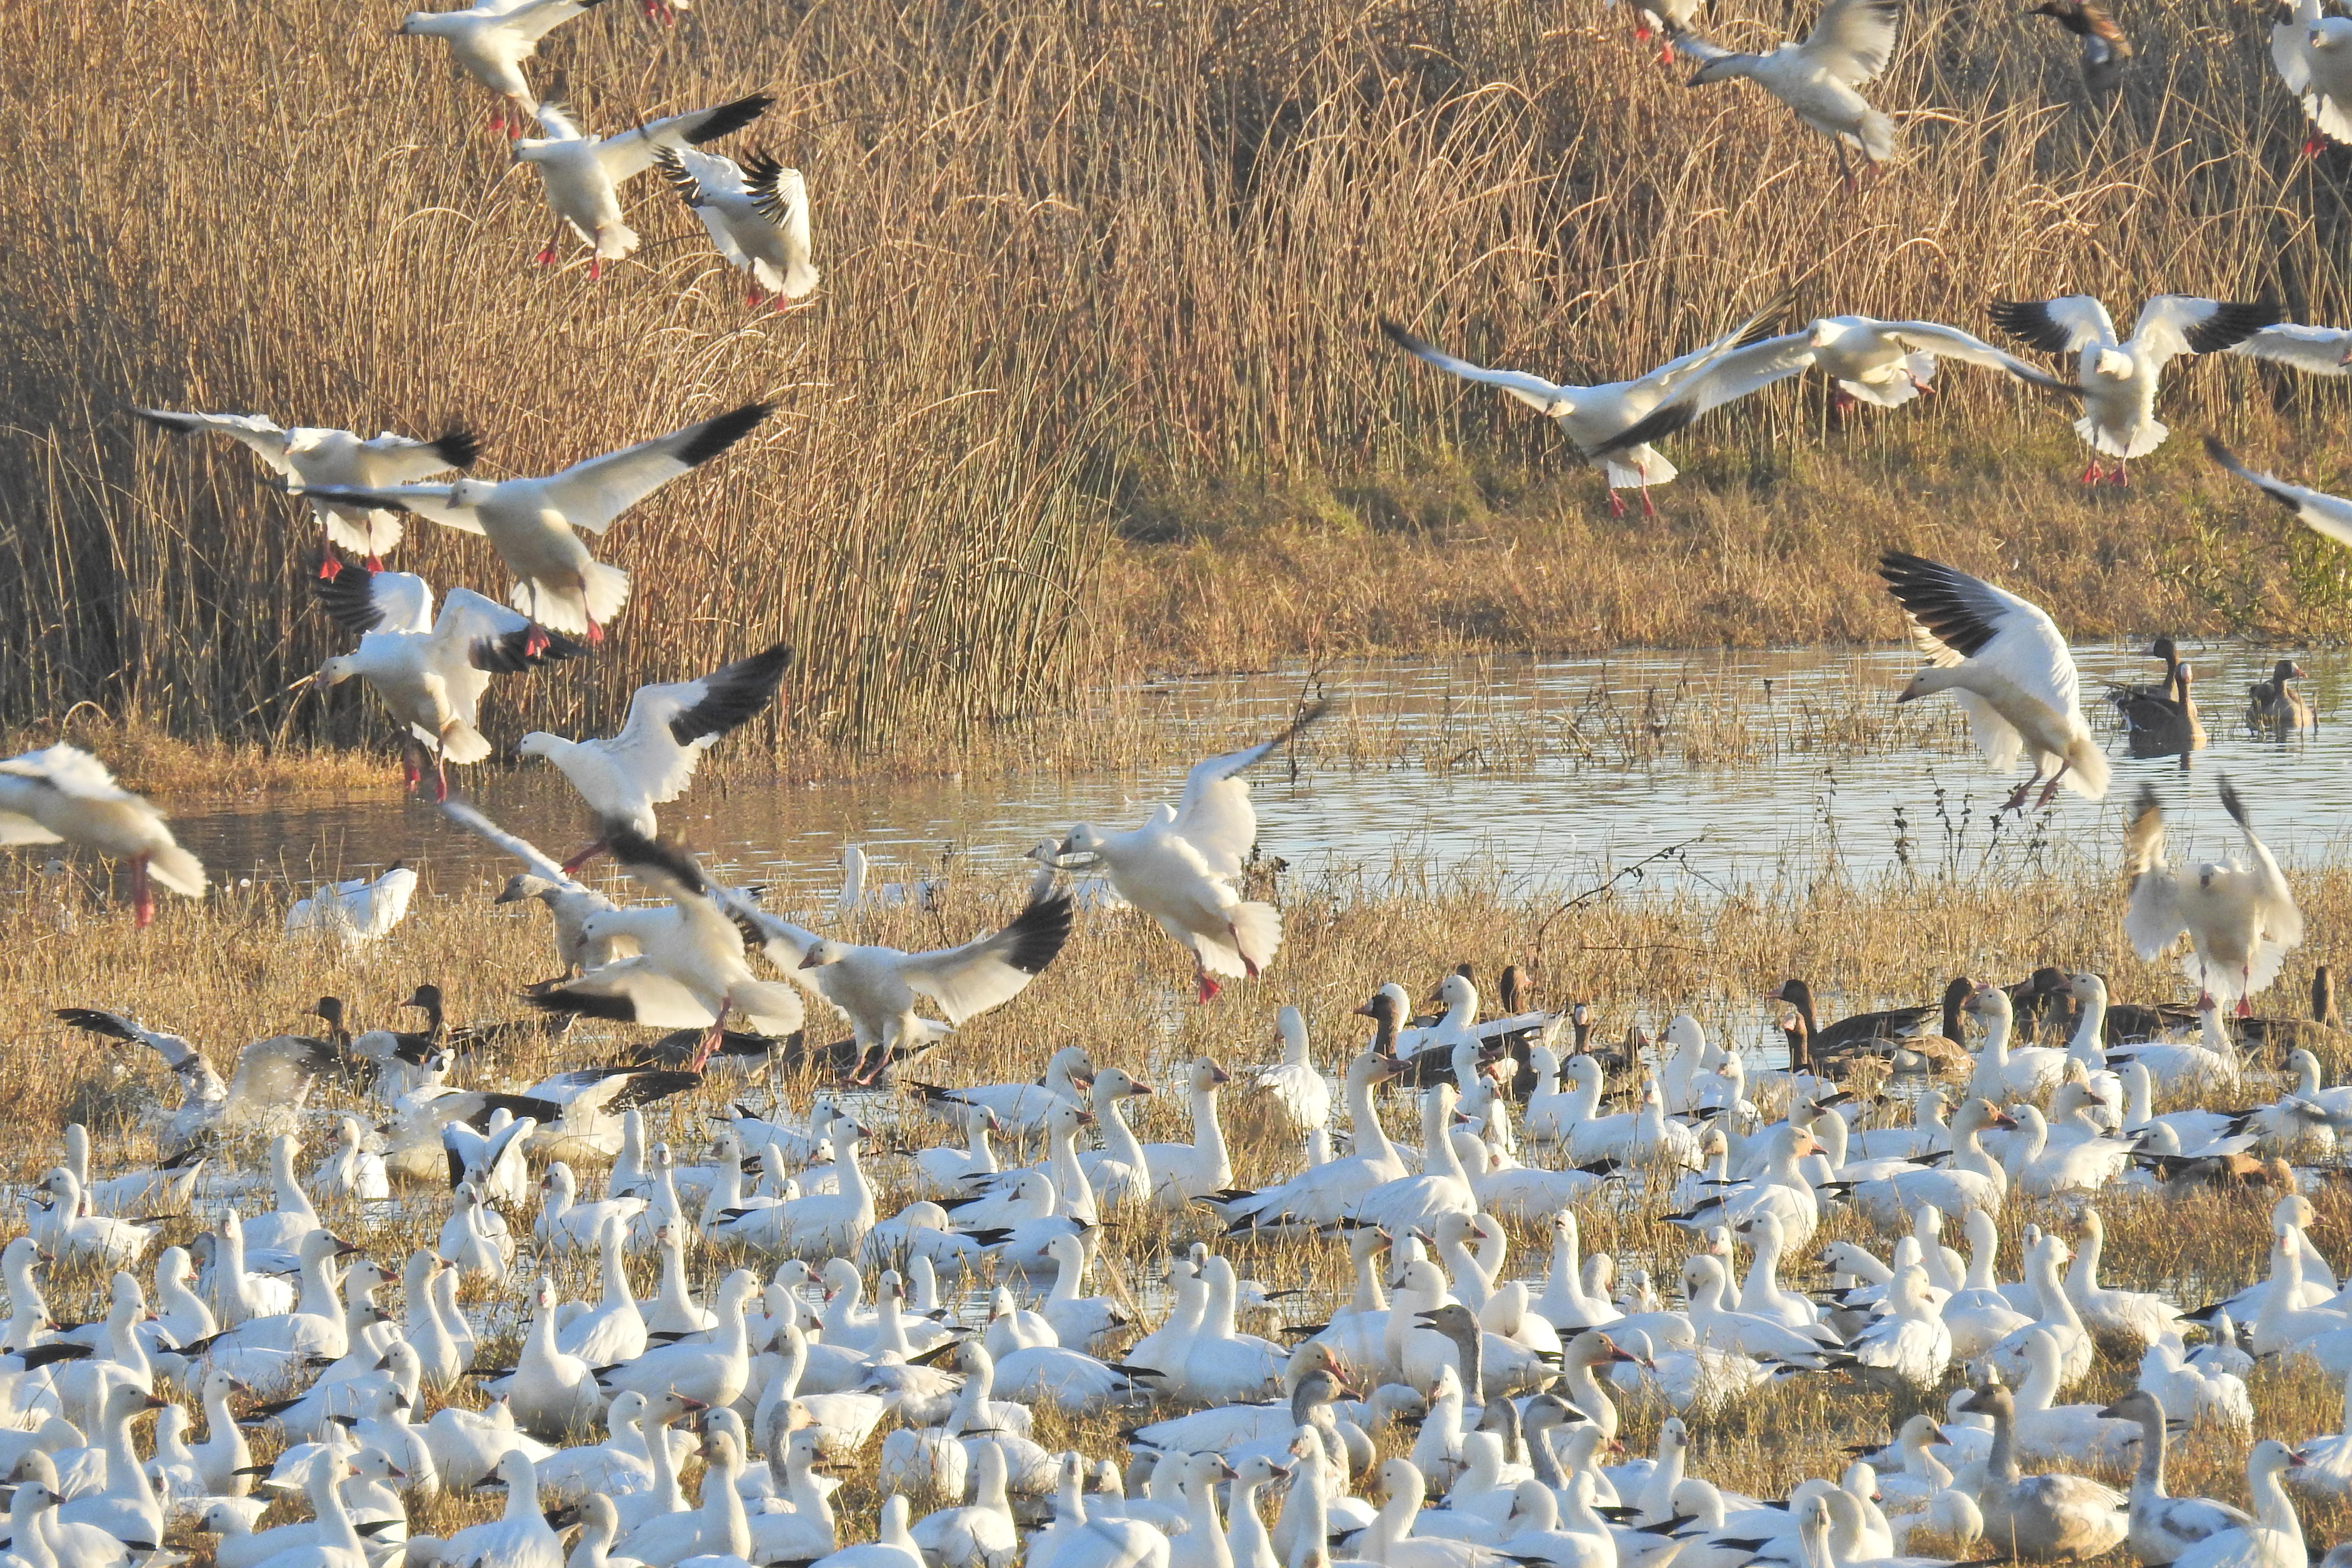 Snow Geese Begin Their Southern Migration from Northern Canada to Central Provinces